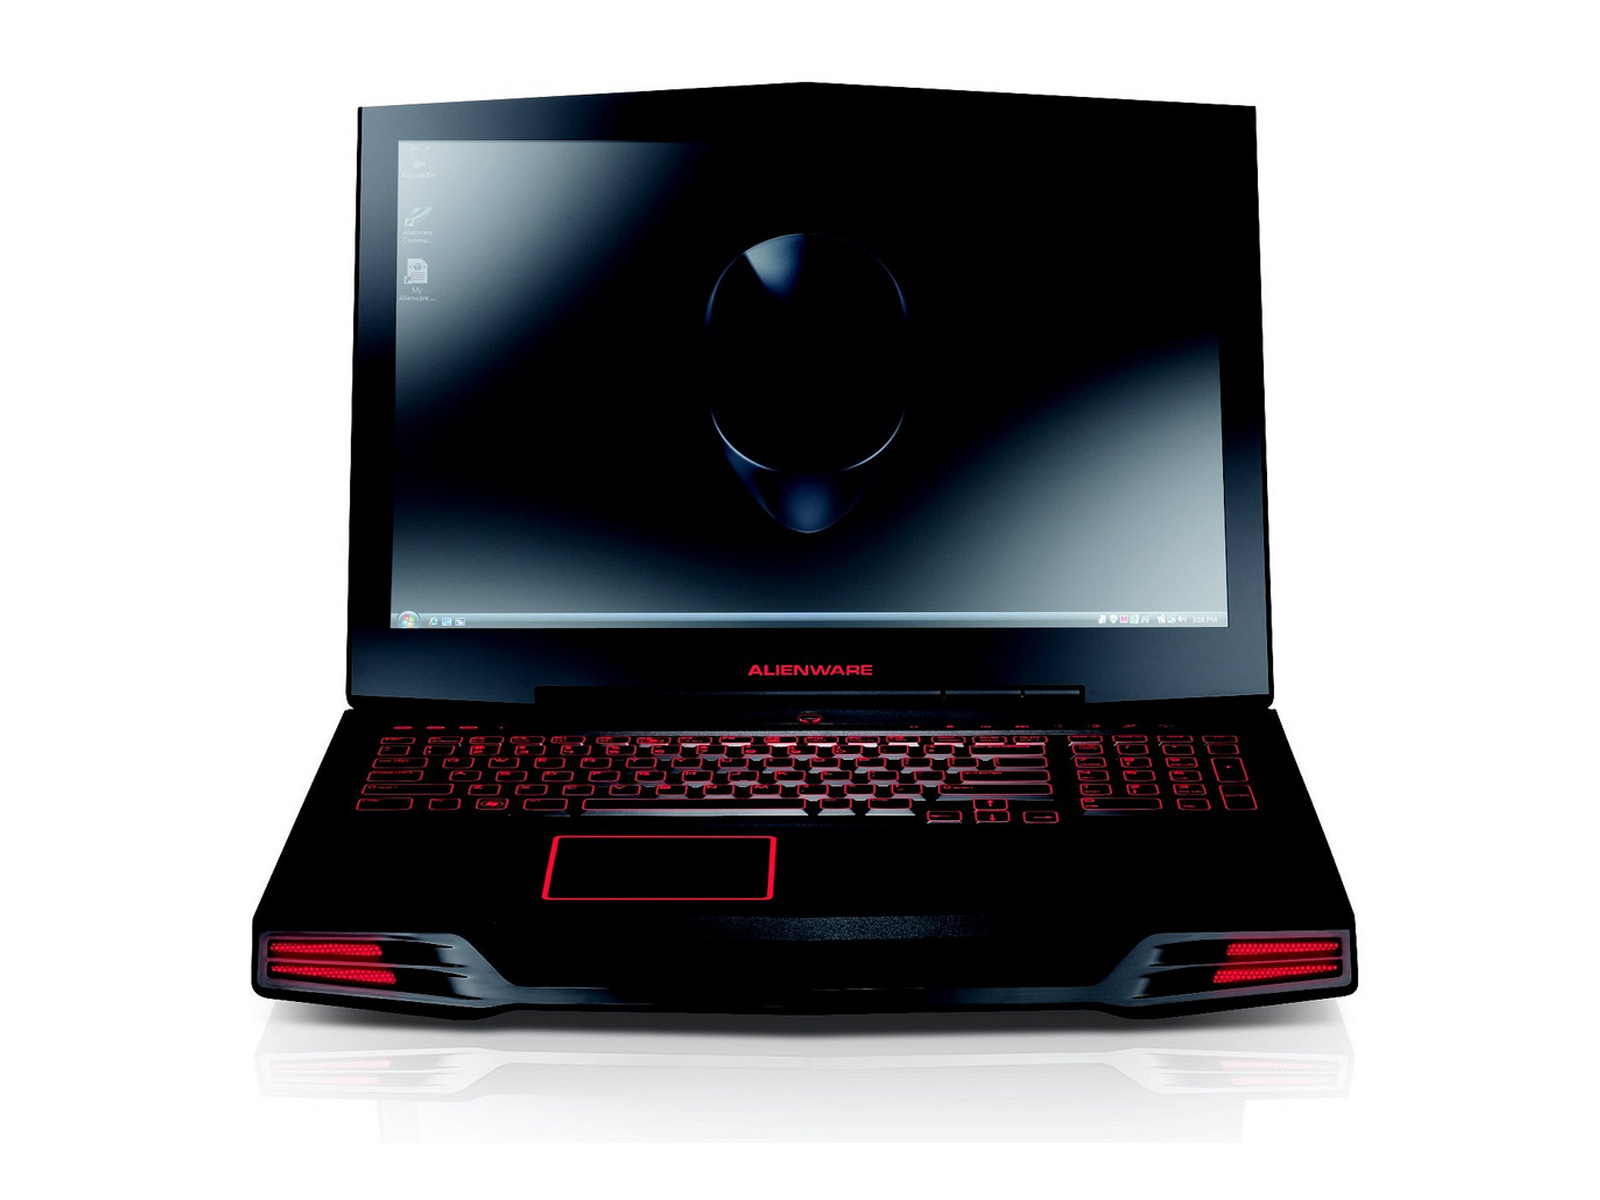 Gaming Computer Laptop Images 6 HD Wallpapers | amagico.com